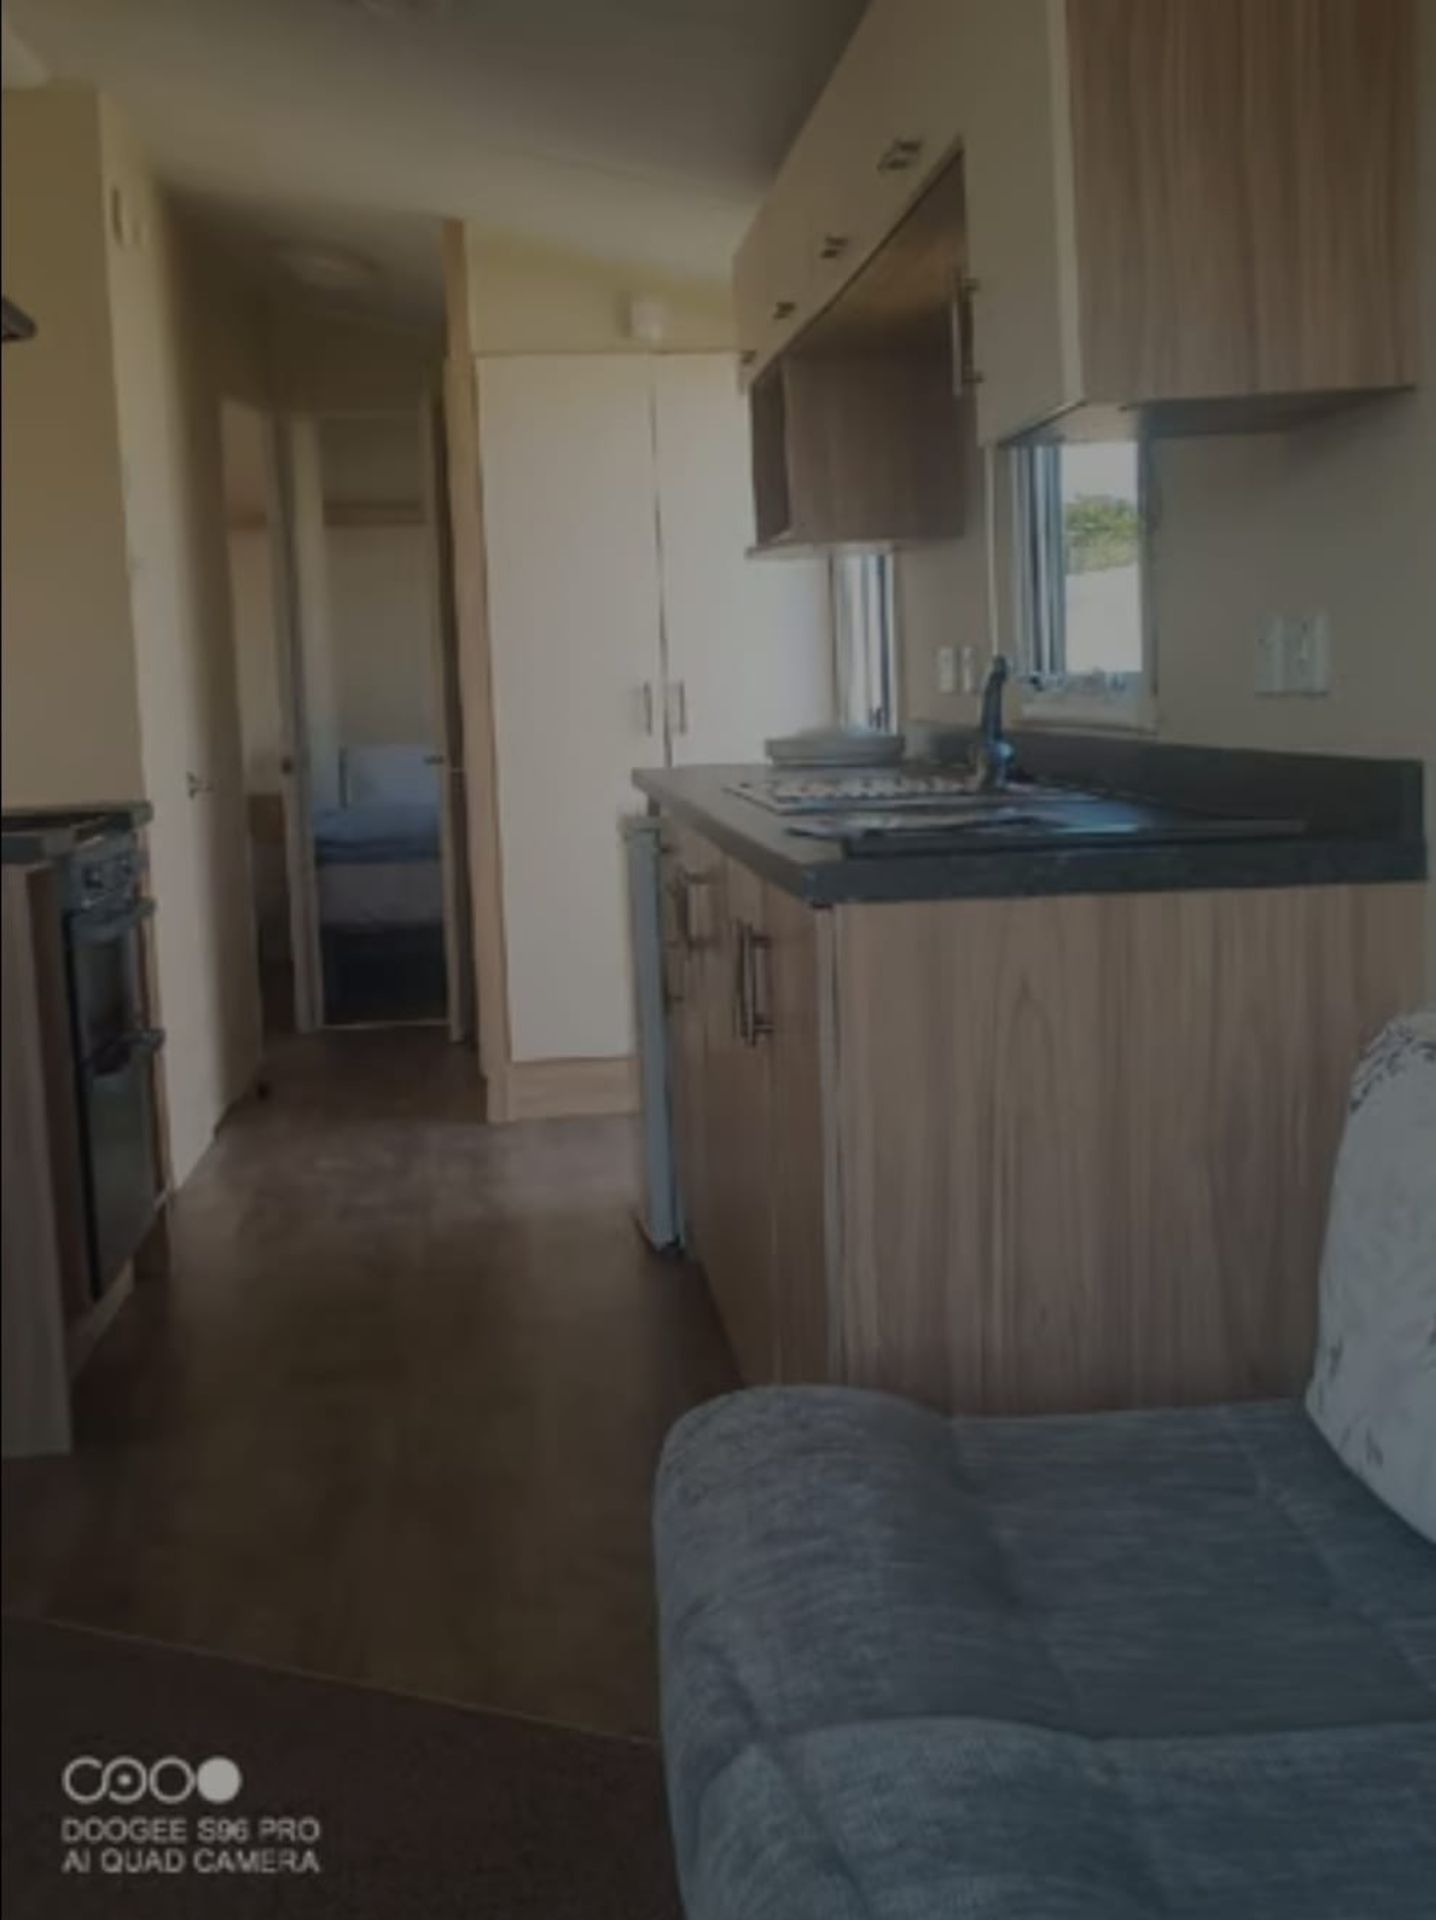 2015 WILLERBY ECO SALSA 3 BEDROOM holiday home ON-SITE SALE. **ON SALE** - Bild 13 aus 13